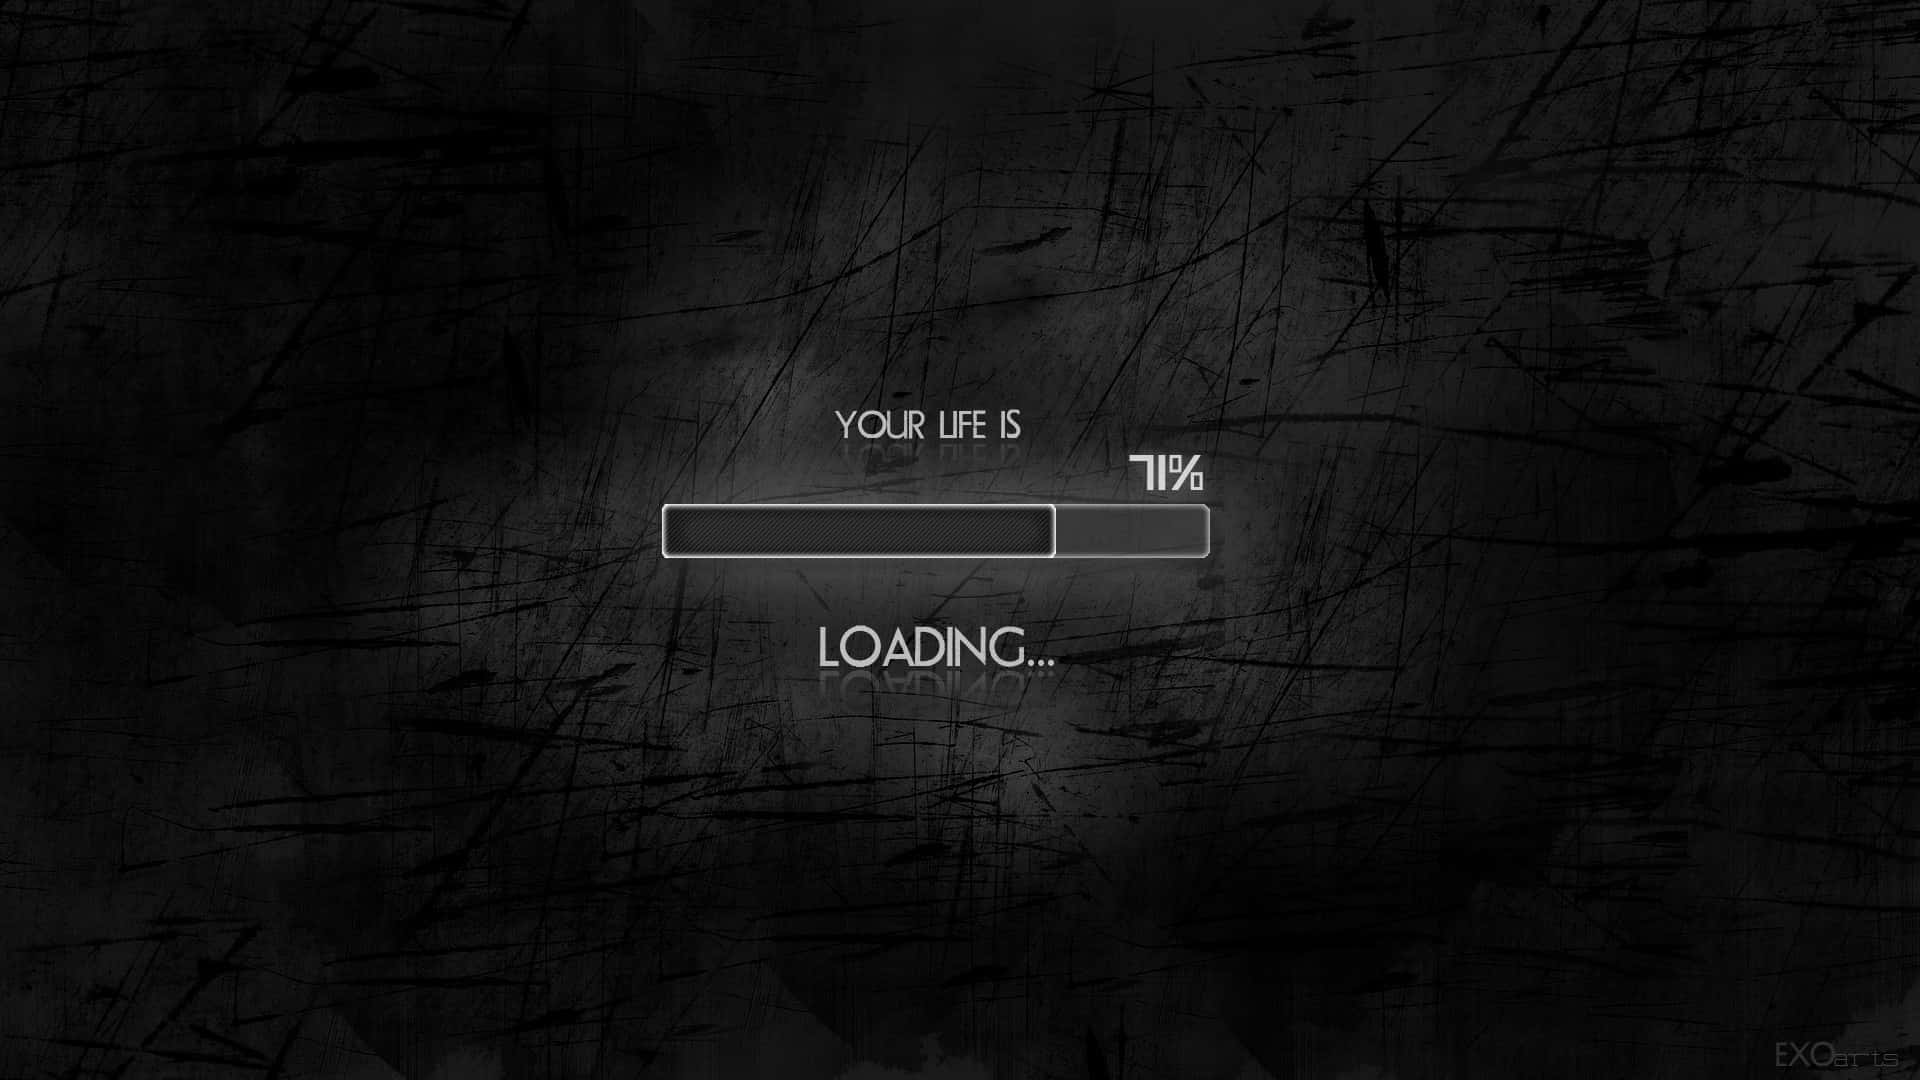 A Black And White Image Of A Loading Screen Wallpaper